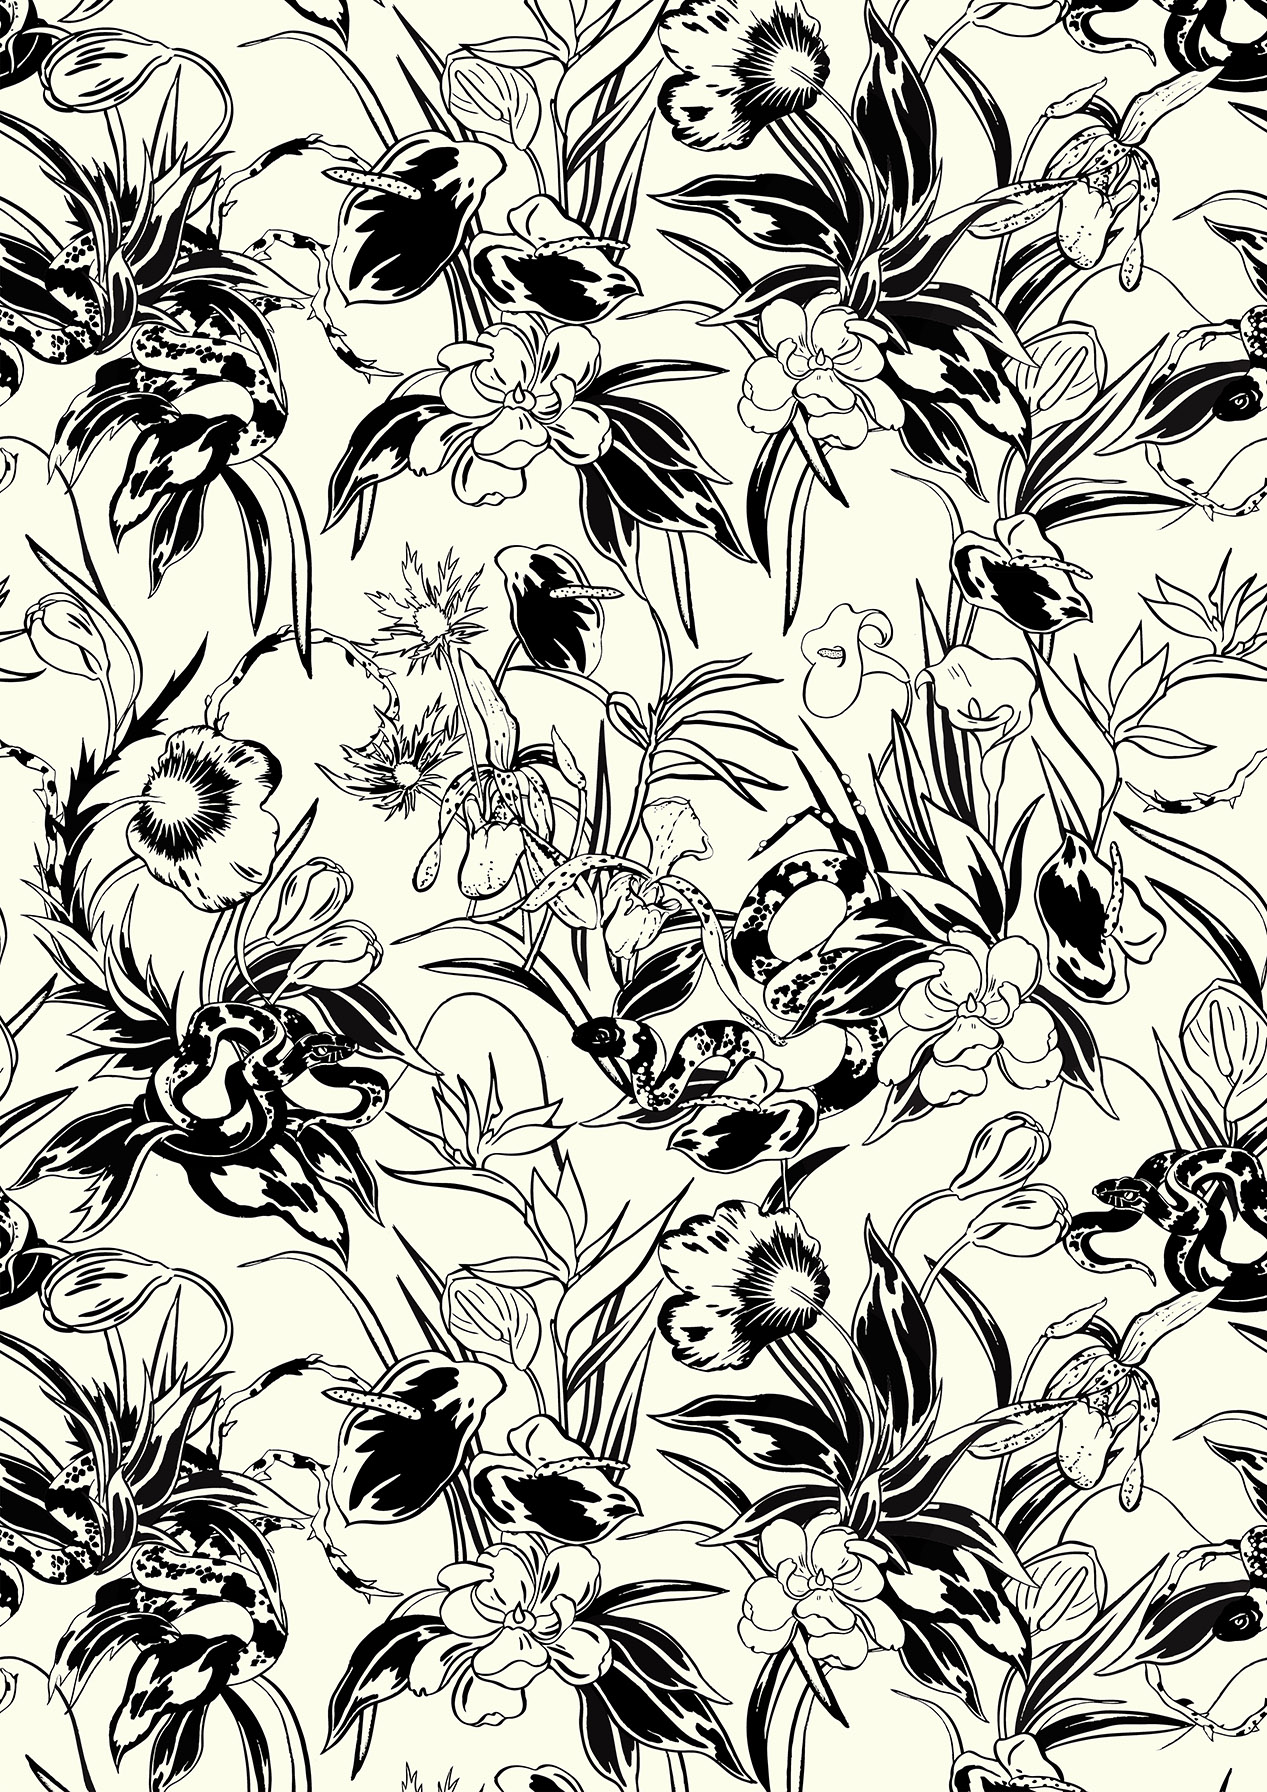 All-over pattern, hand drawn by Em Prov for Olivia von Halle's Garden of Earthly Delights Collection